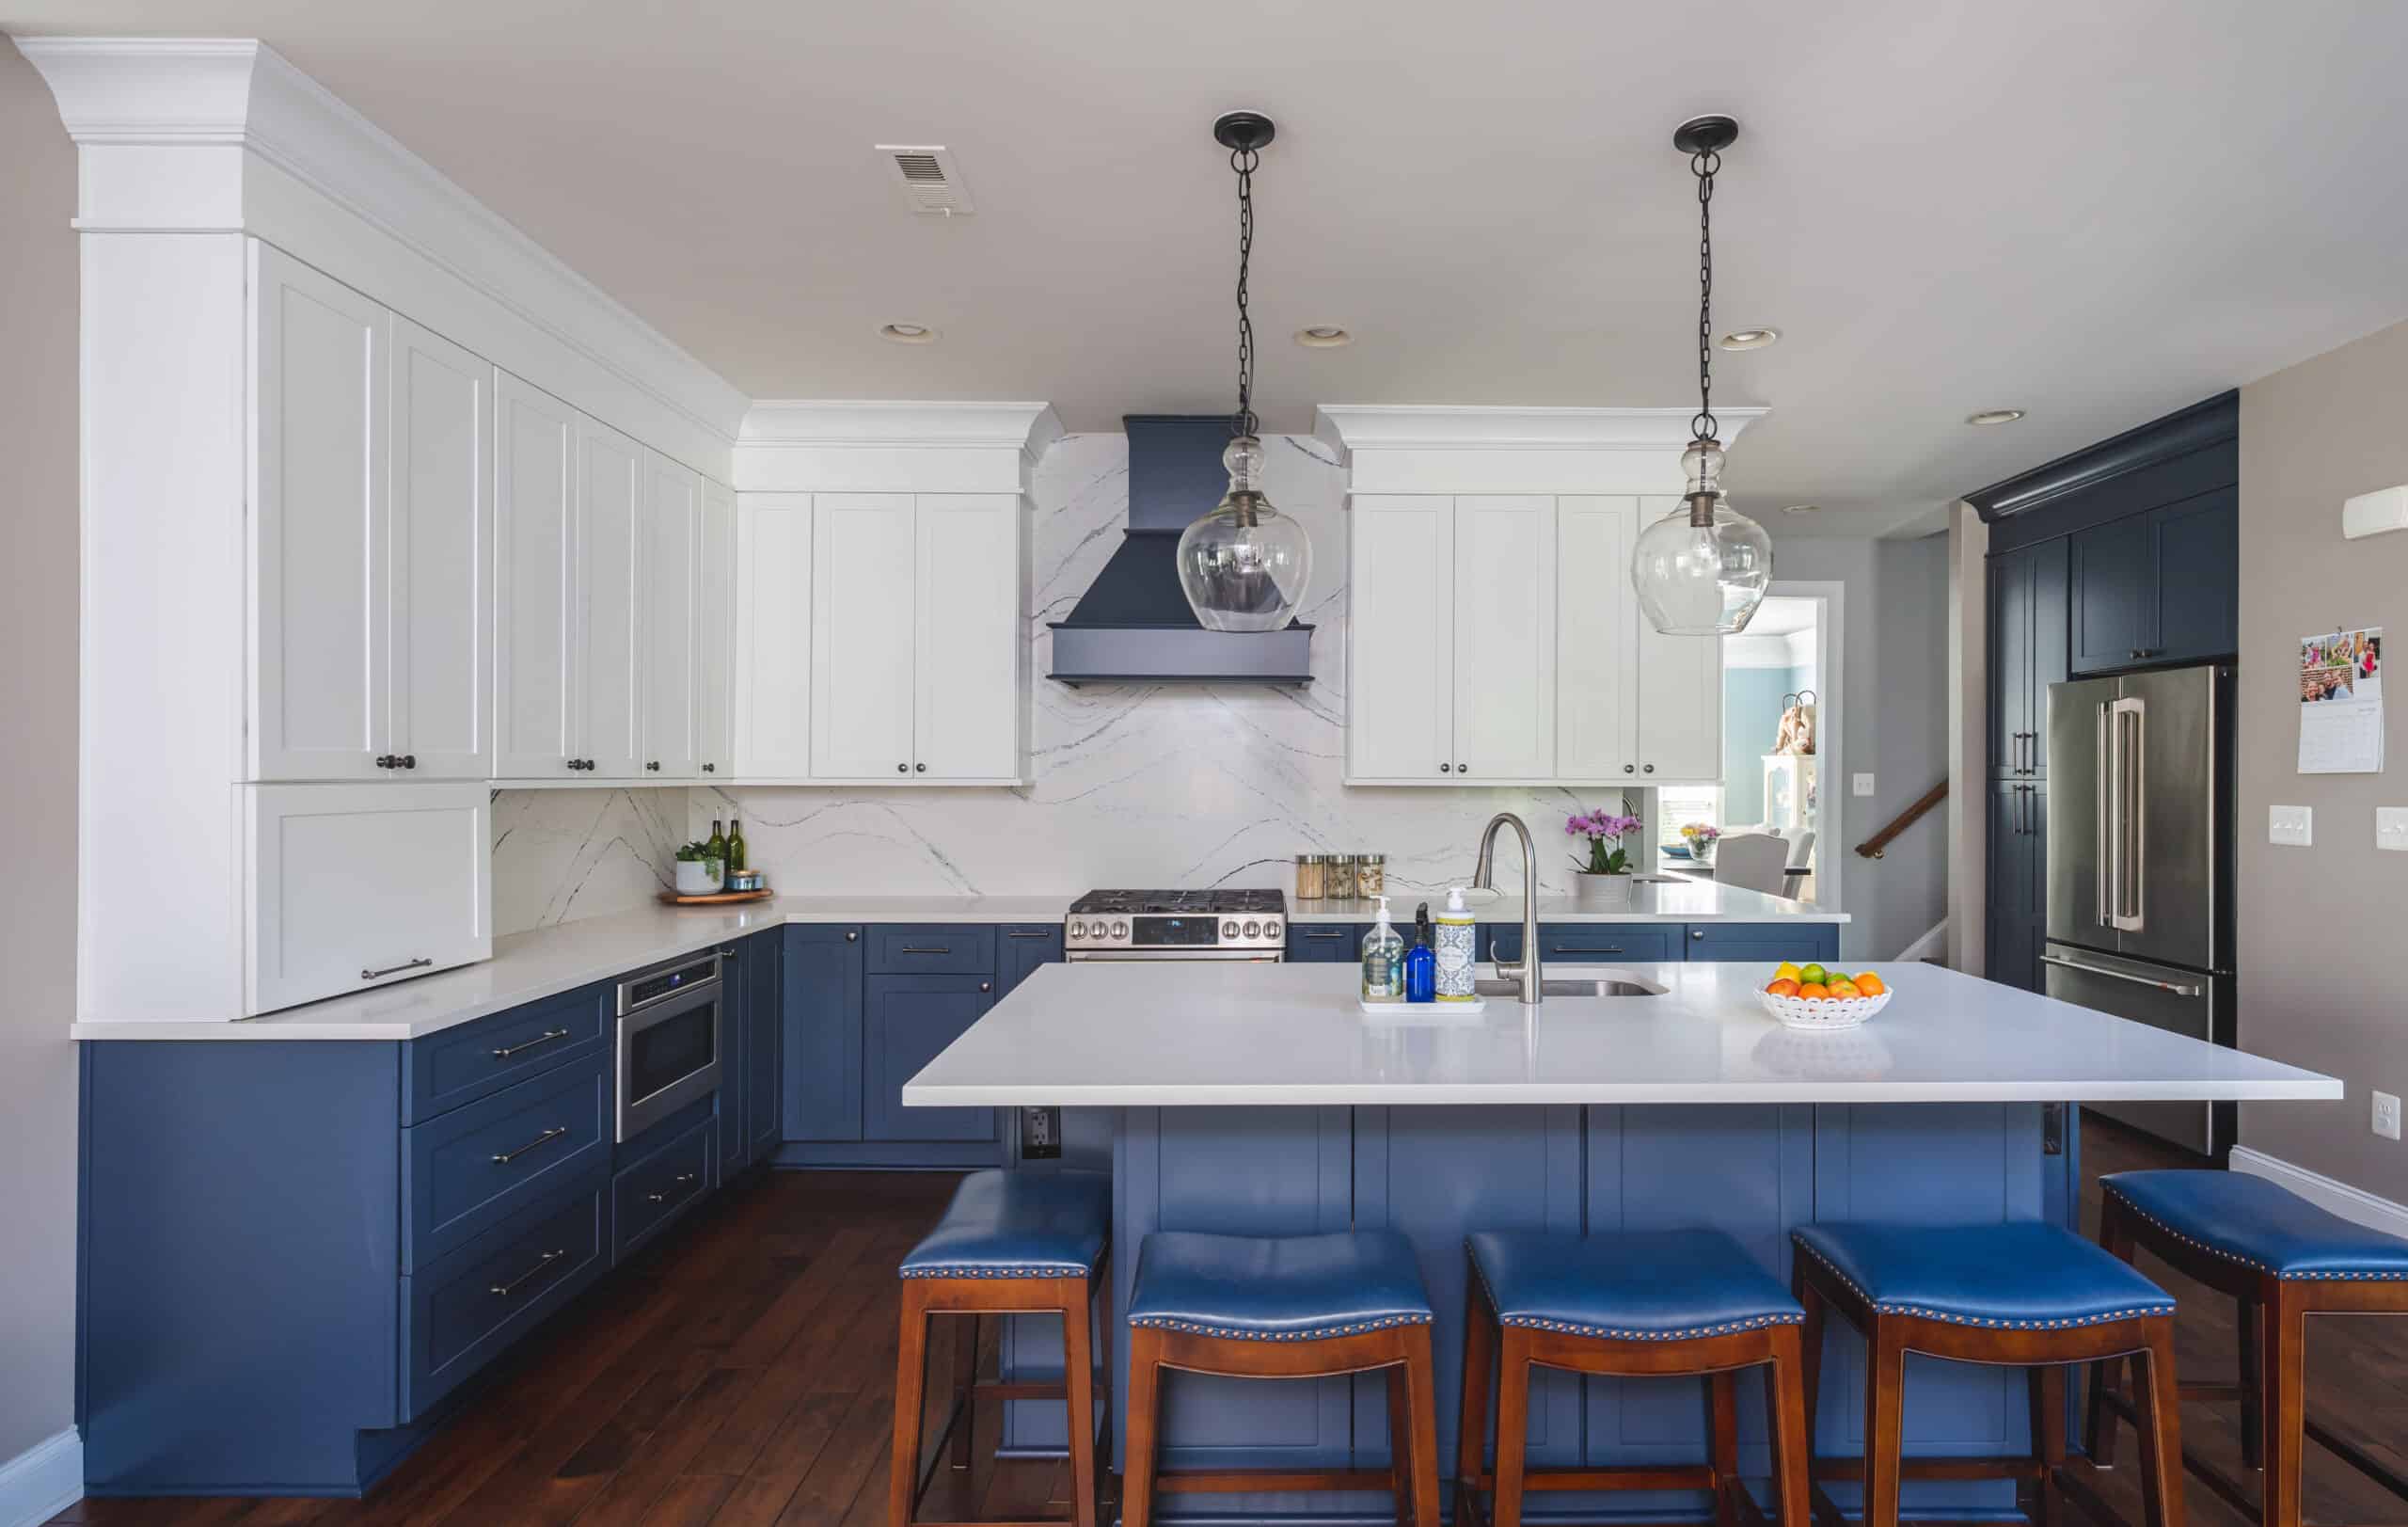 A well-designed kitchen showcasing blue cabinets and stainless steel appliances